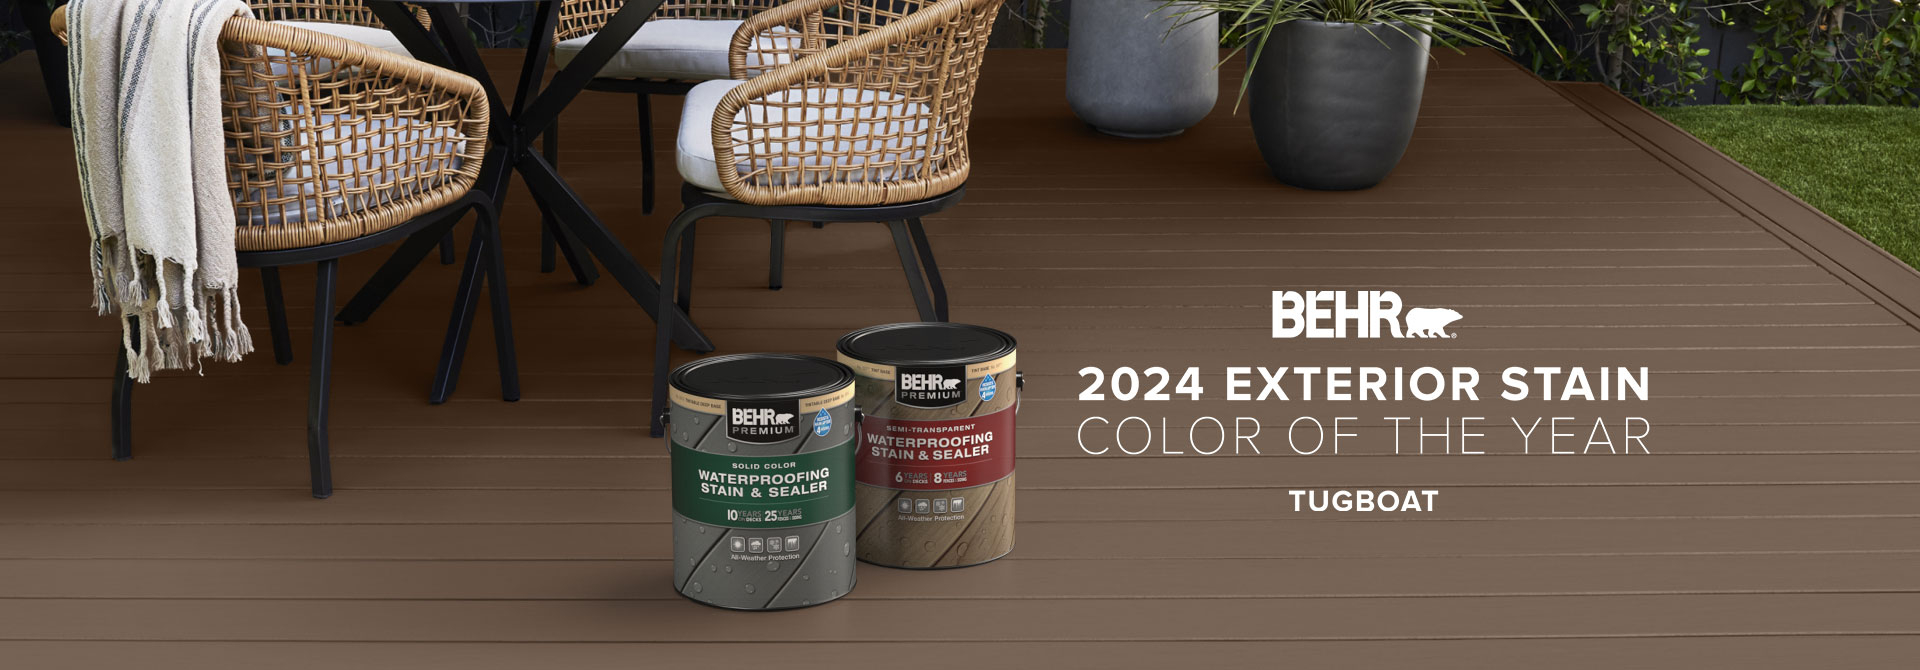 Wooden deck stained in Tugboat, featuring Behr 2024 Color of the Year, Tugboat